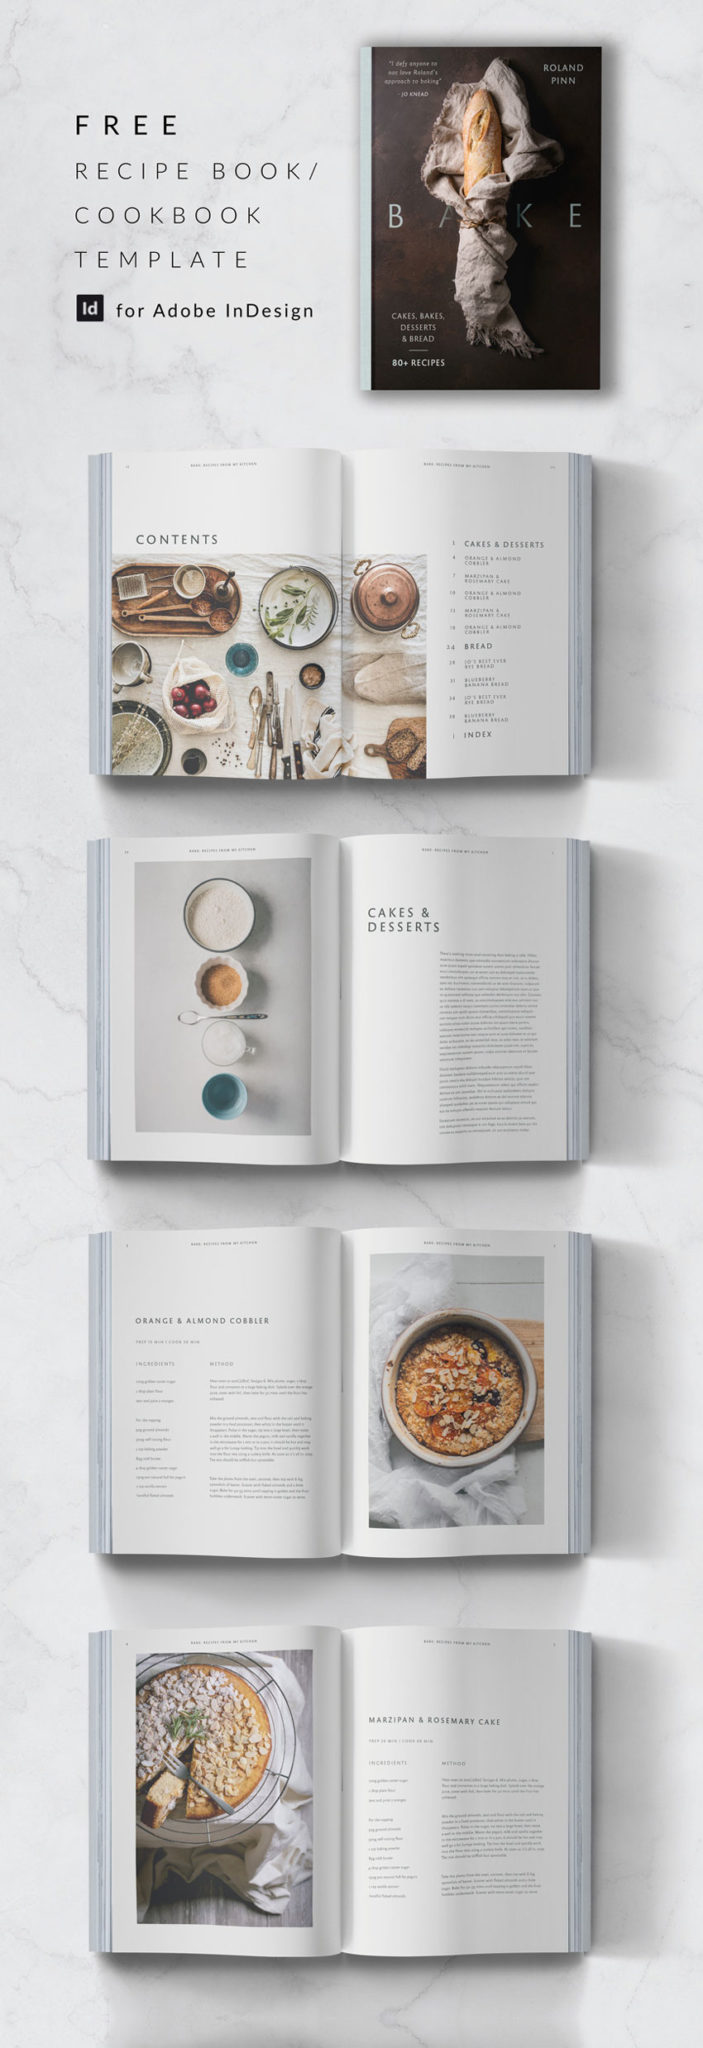 free indesign template free recipe book template free cookbook template free cookery book template for indesign